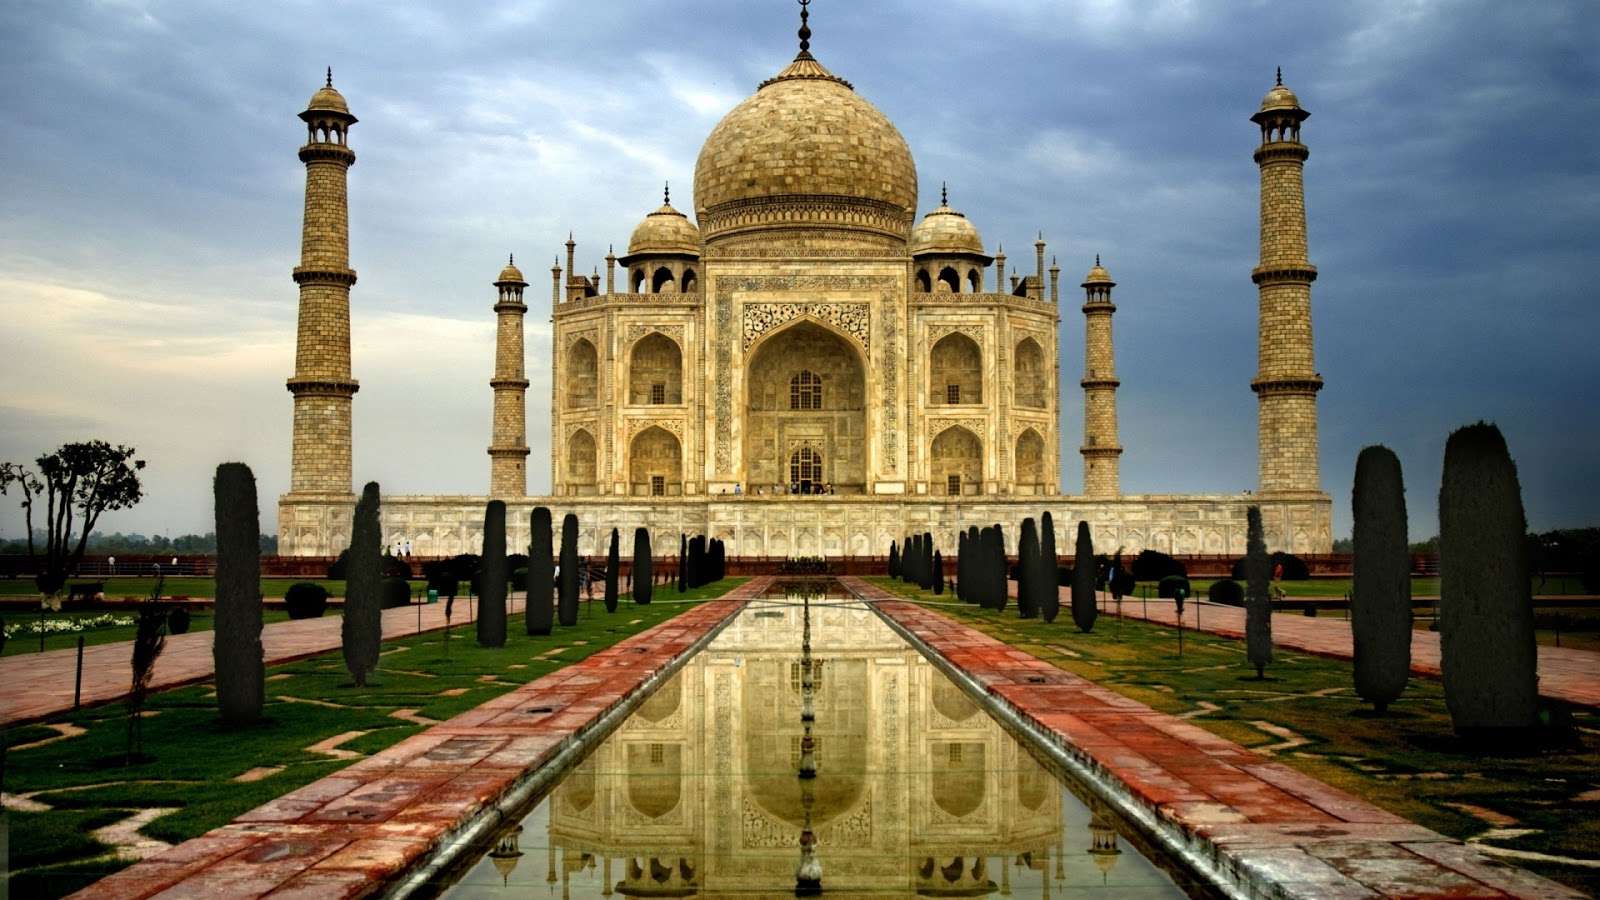 The most beautiful places in t jigsaw puzzle online